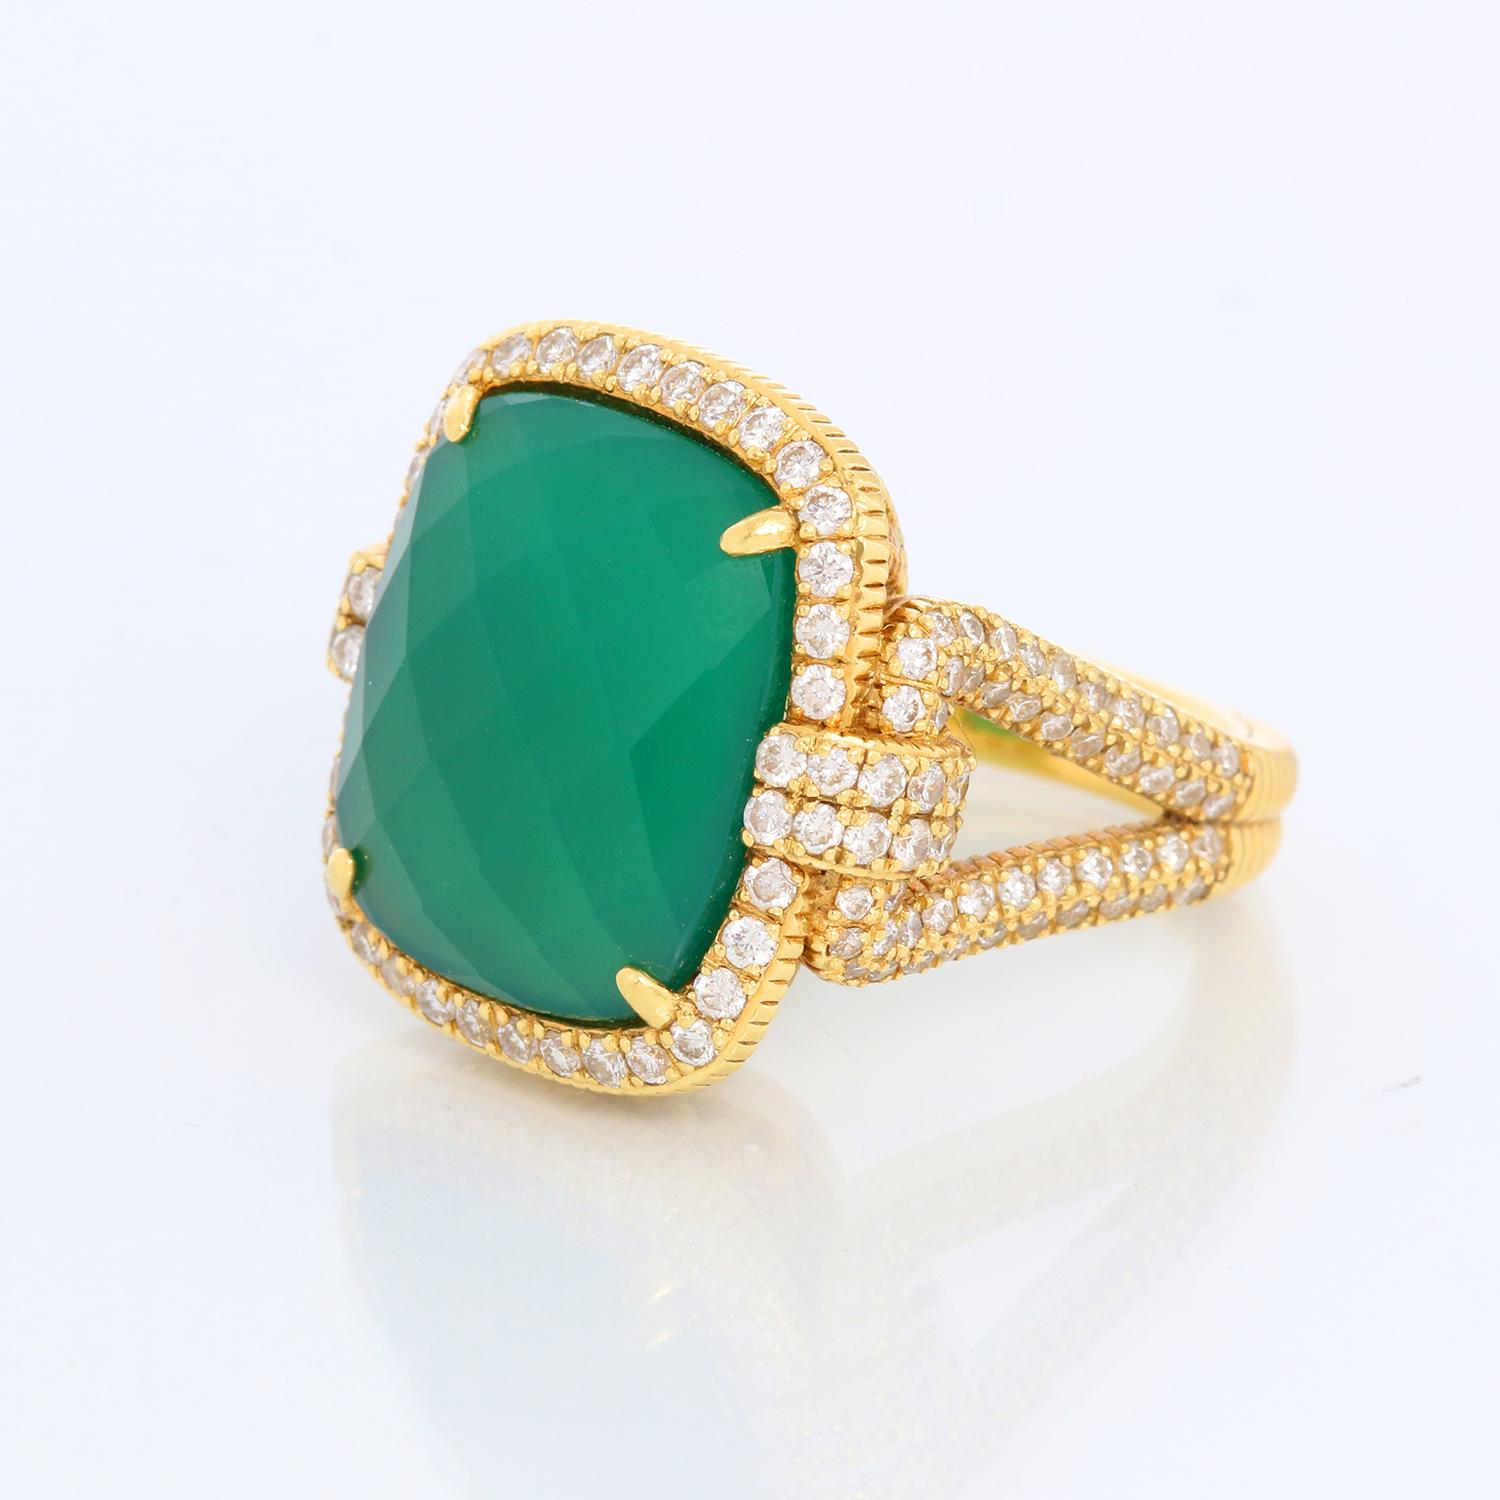 Judith Ripka 18K Yellow Gold Chalcedony & Diamond Ring - Beautiful cocktail ring. Measures .75 by .50 inches. Hallmarked; designers mark and 18K.  Pre-owned with custom box. Size 6 1/2.